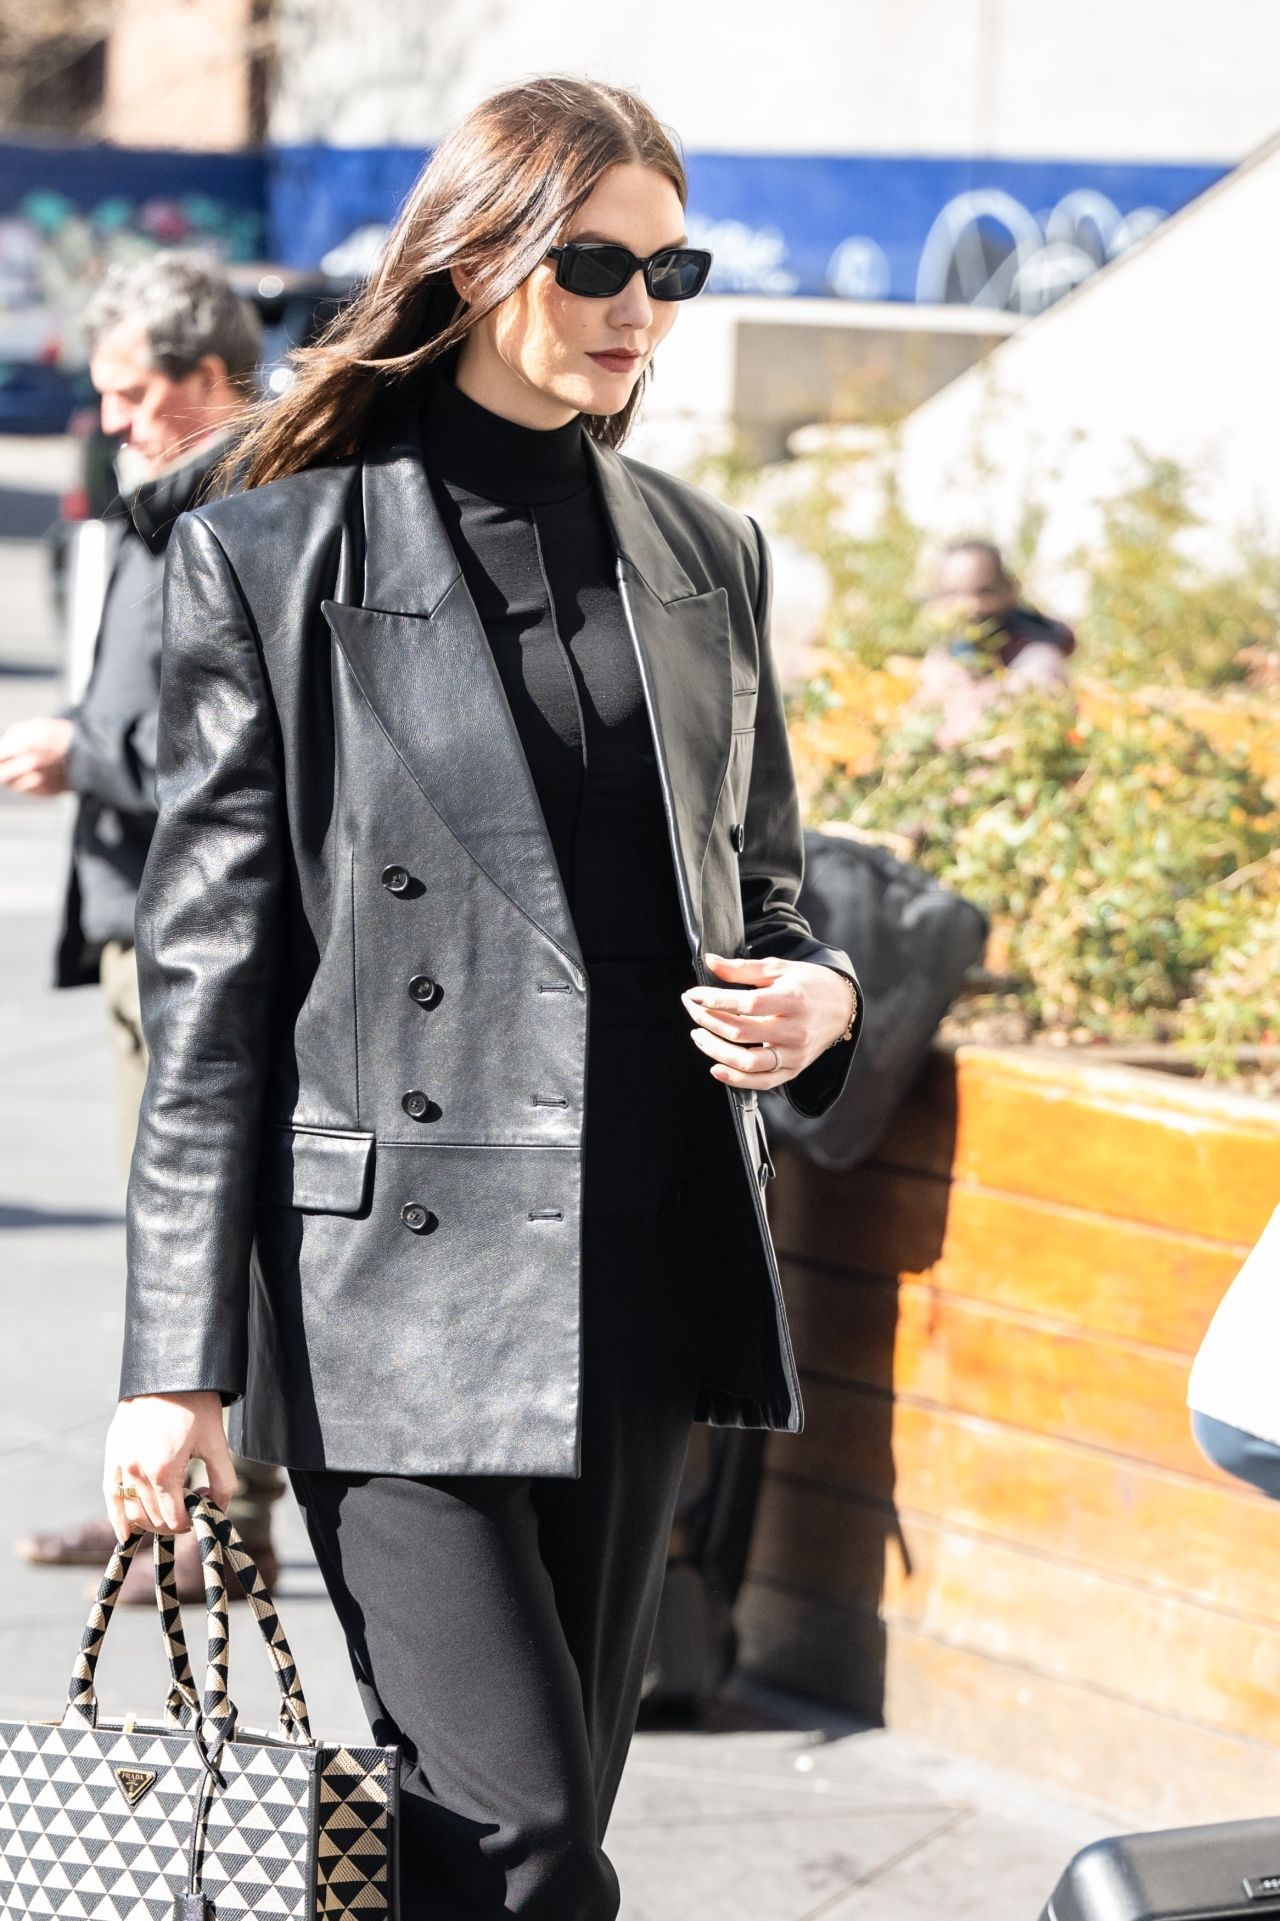 Karlie Kloss Wearing a Black Leather Jacket and Carrying a Prada Tote ...